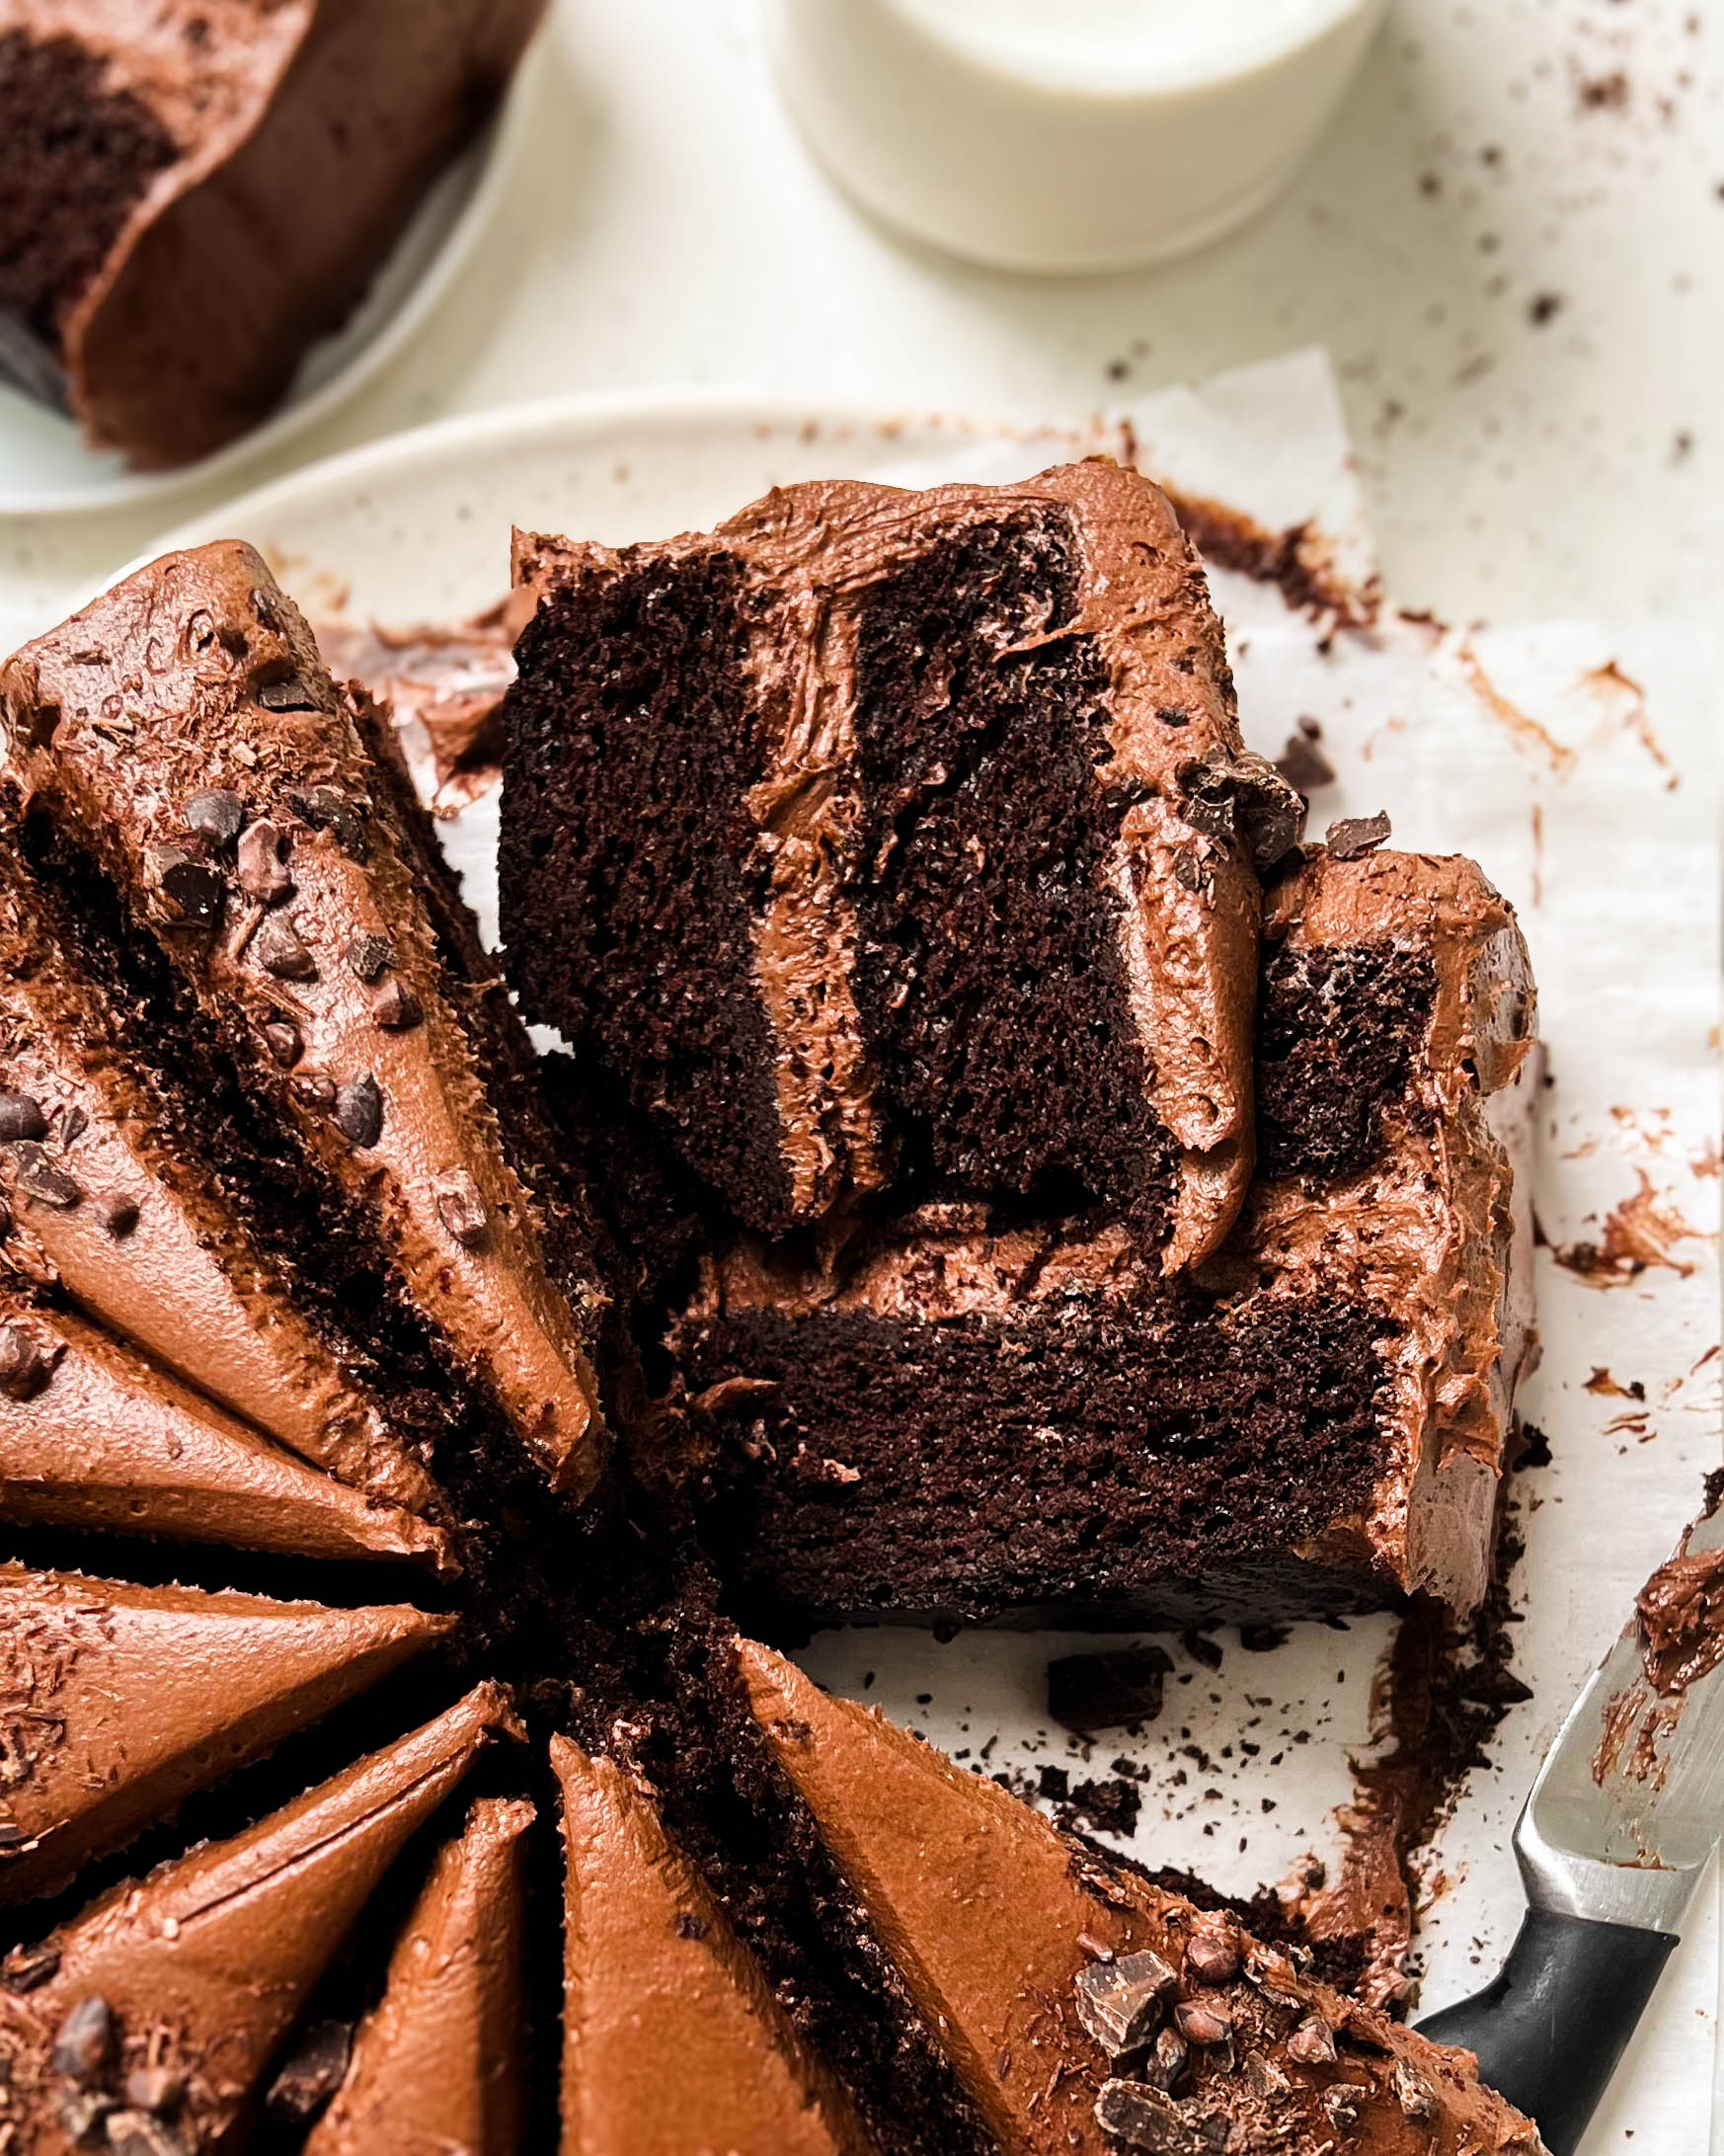 One Chocolate Cake To Rule Them All - by Ben Mandelker